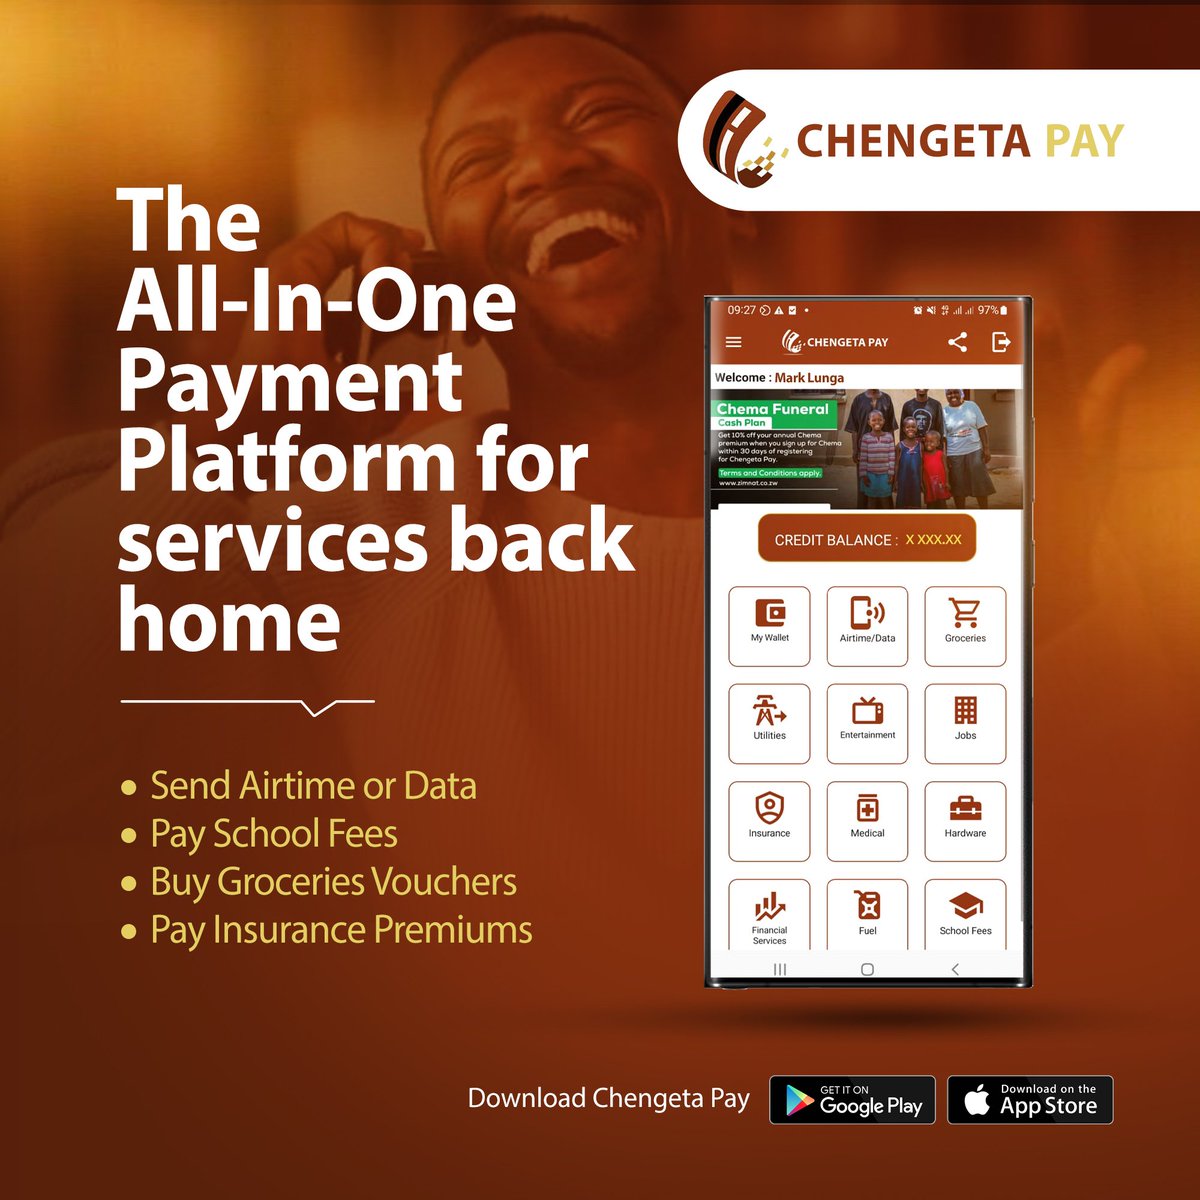 Sign-up on the all-in-one payment platform. Get to pay all #Kumusha bills from the #Diaspora. Pay for Airtime, School Fees, Grocery Vouchers, Electricity & Water, Insurance & more on Chengeta Pay!
#ChengetaPay #InternationalPayments